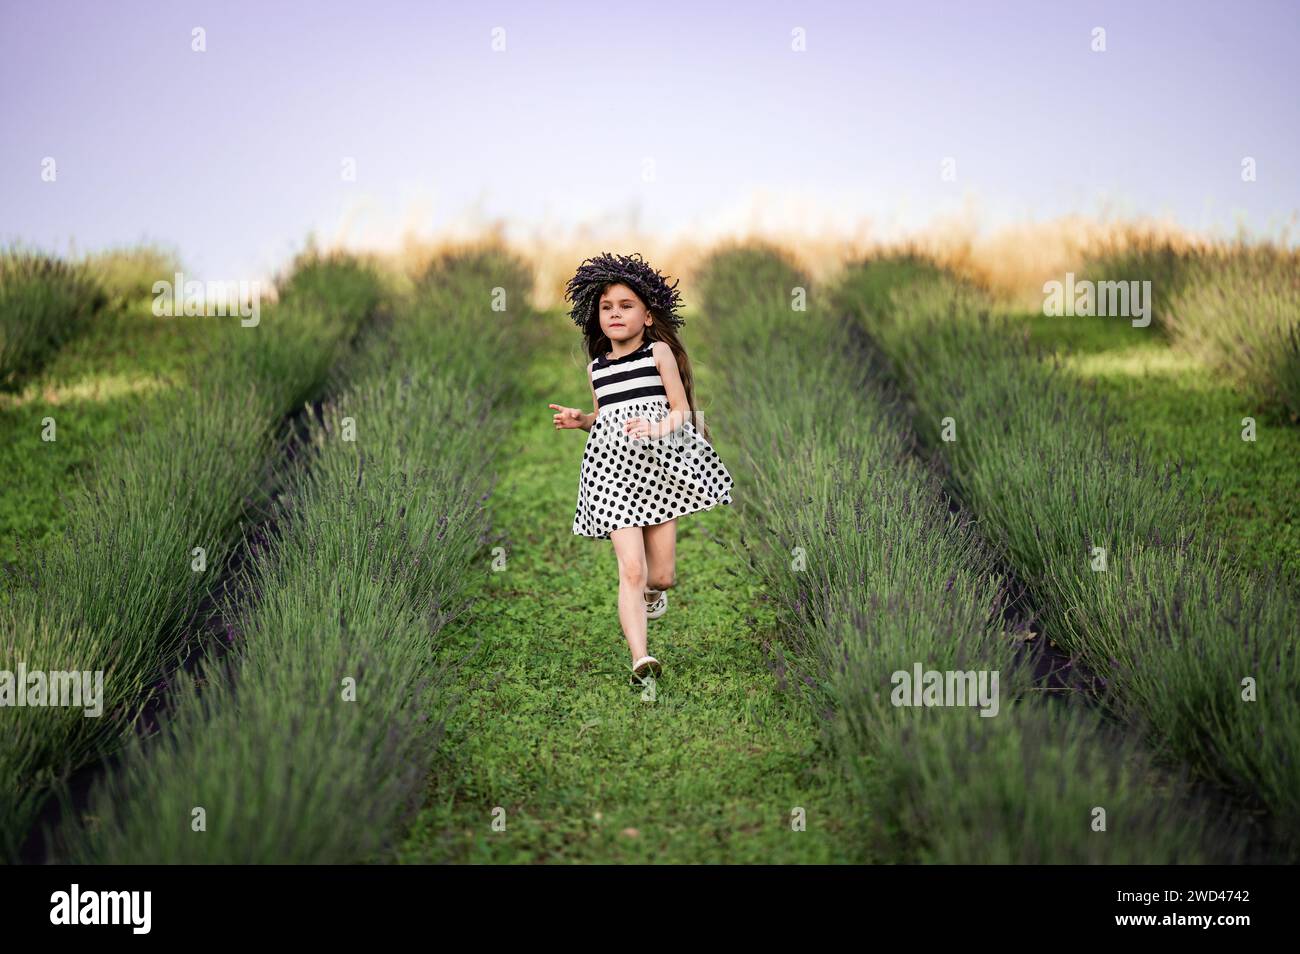 A little girl runs between lavender rows in a dress, a girl in a lavender wreath. Stock Photo